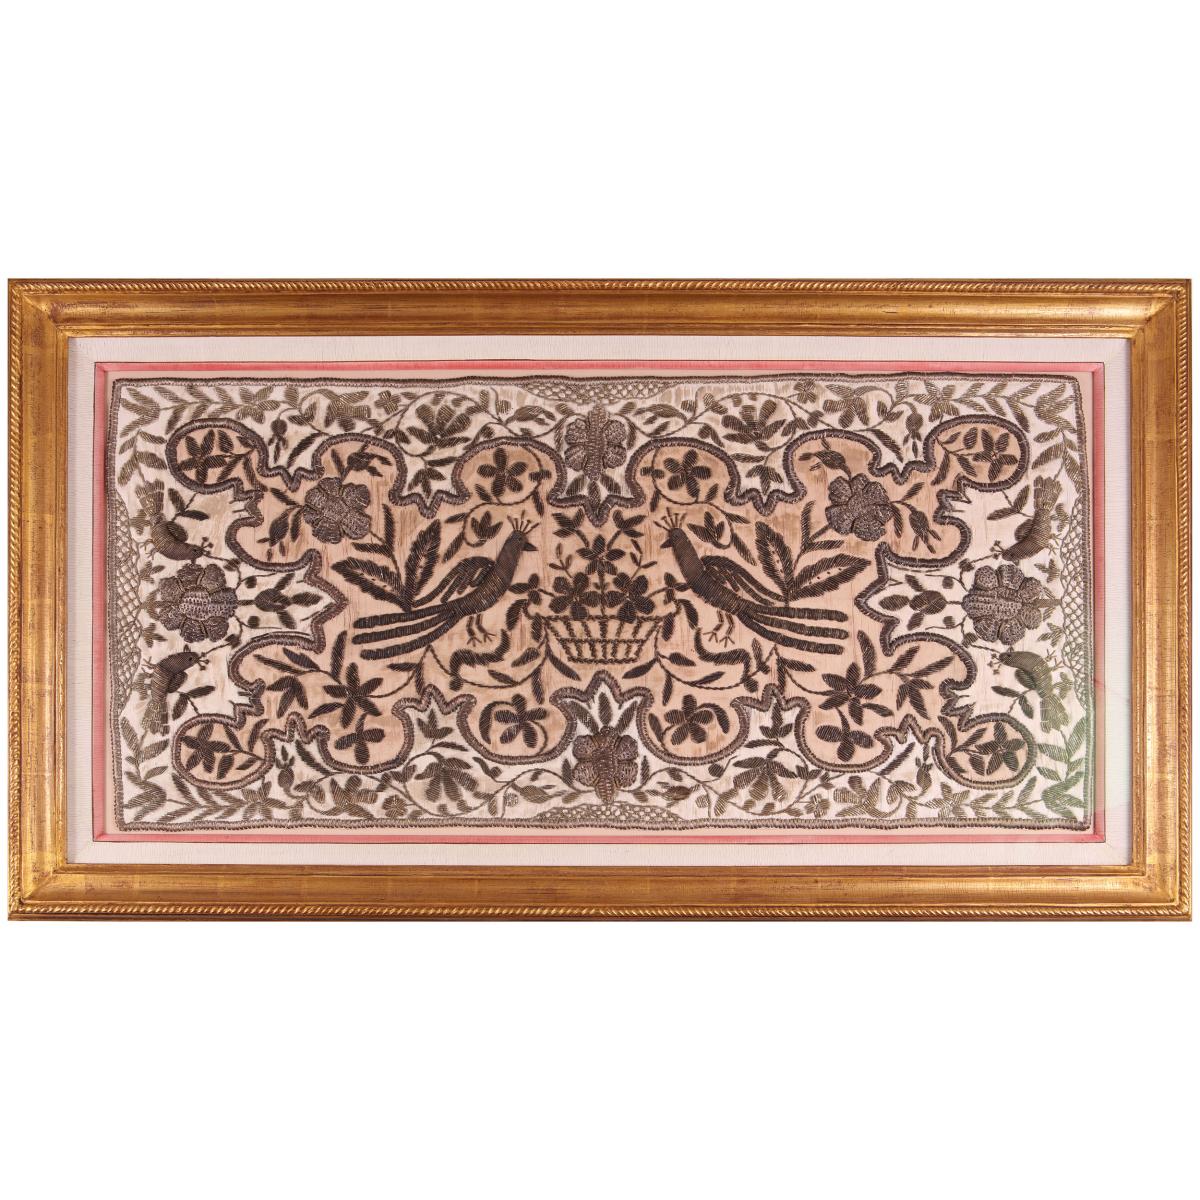 18th century metal-thread embroidery panel